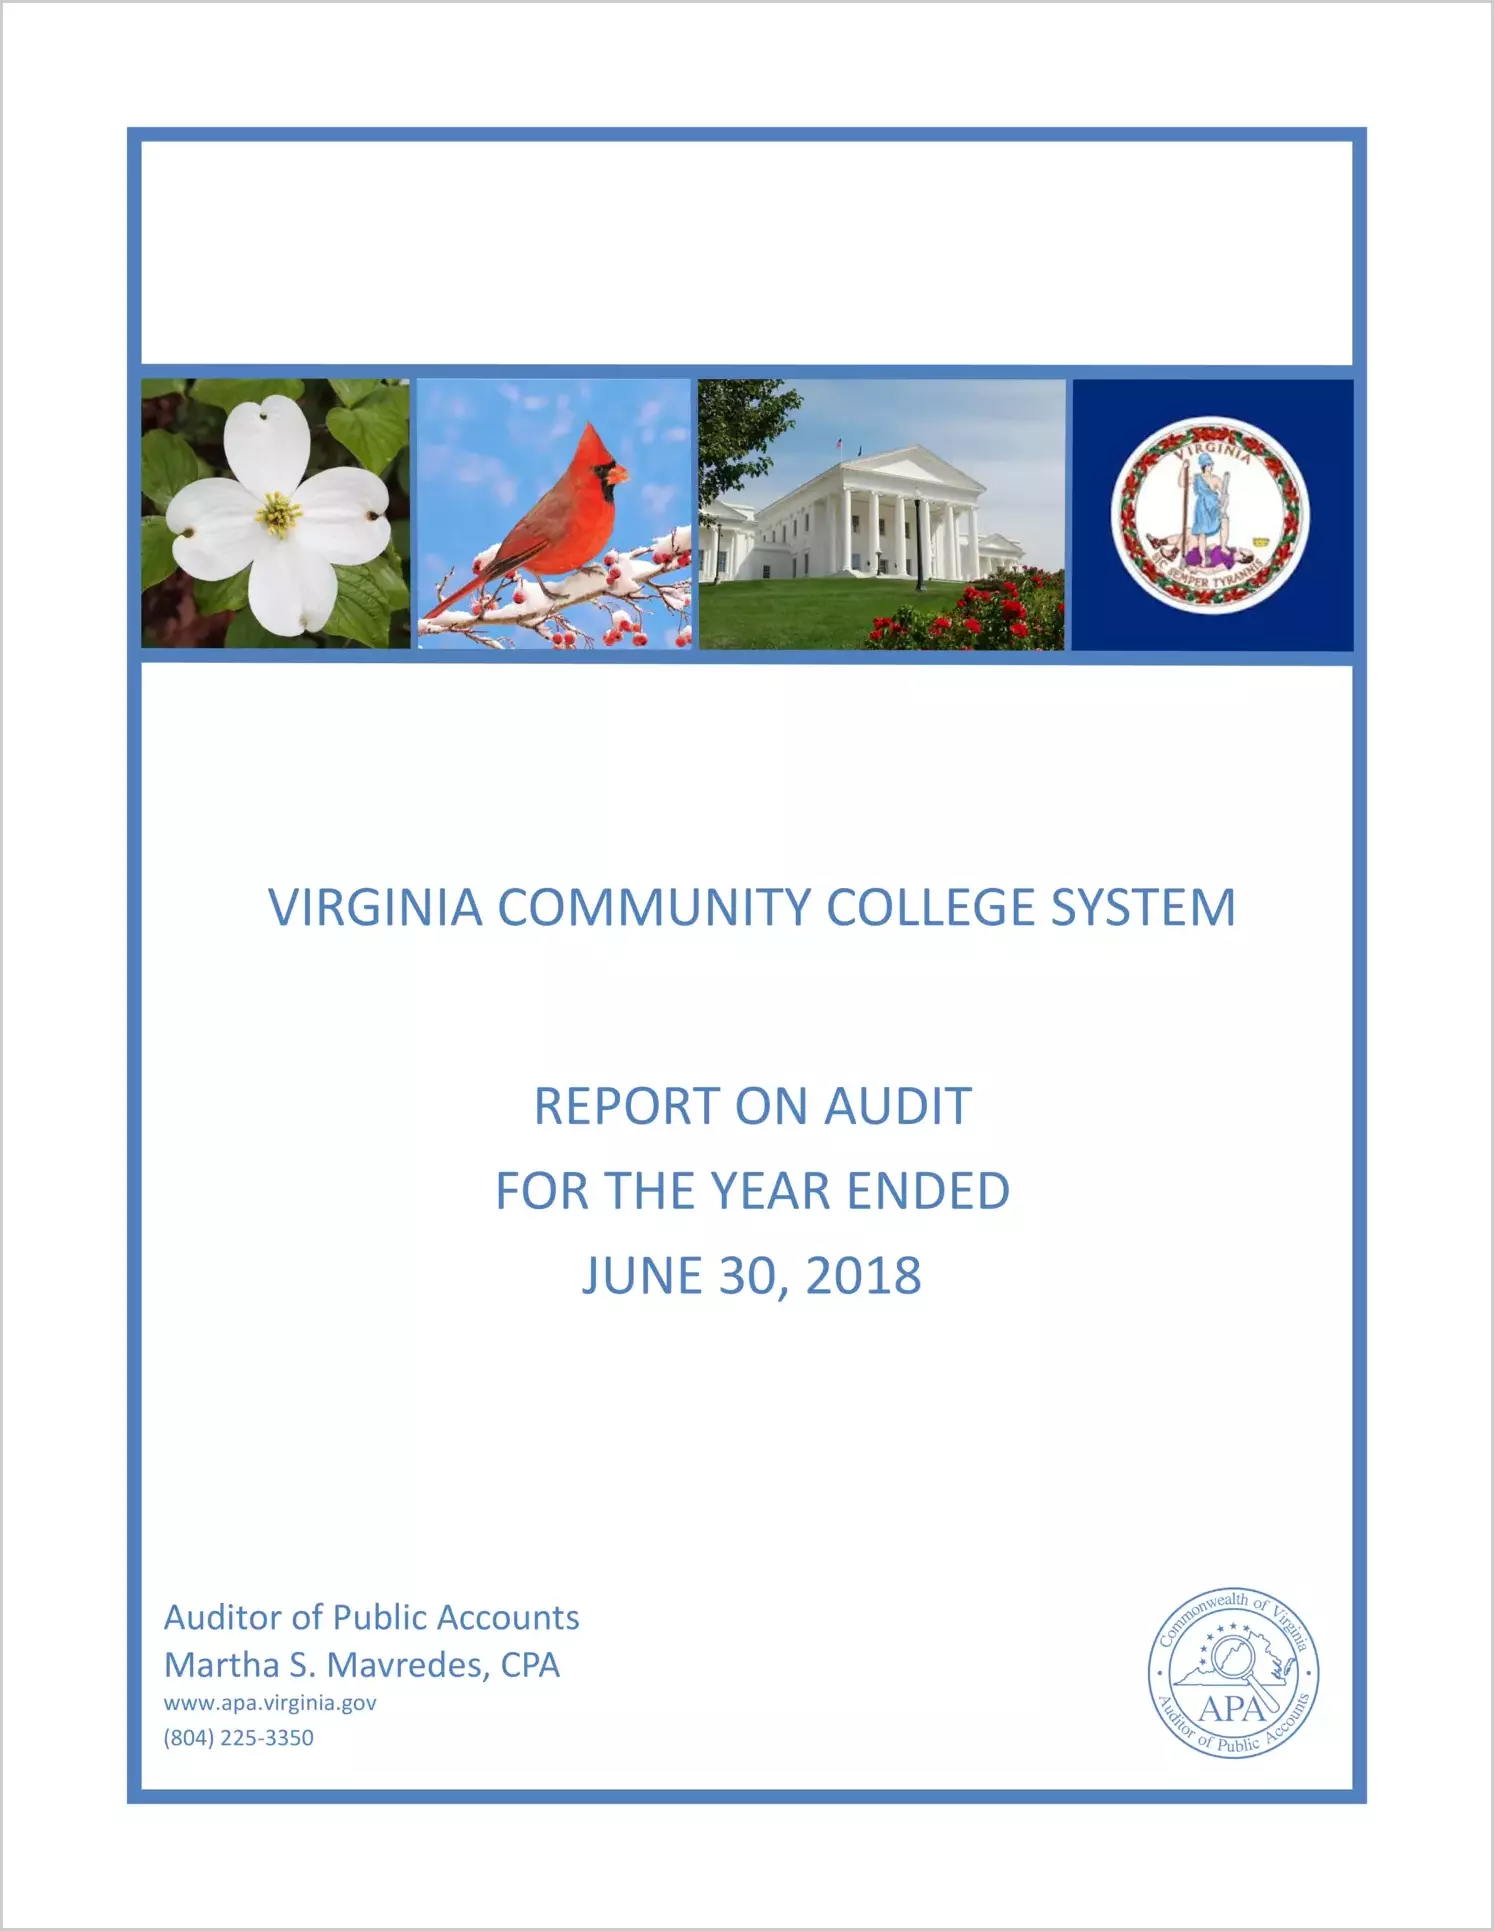 Virginia Community College System for the year ended June 30, 2018